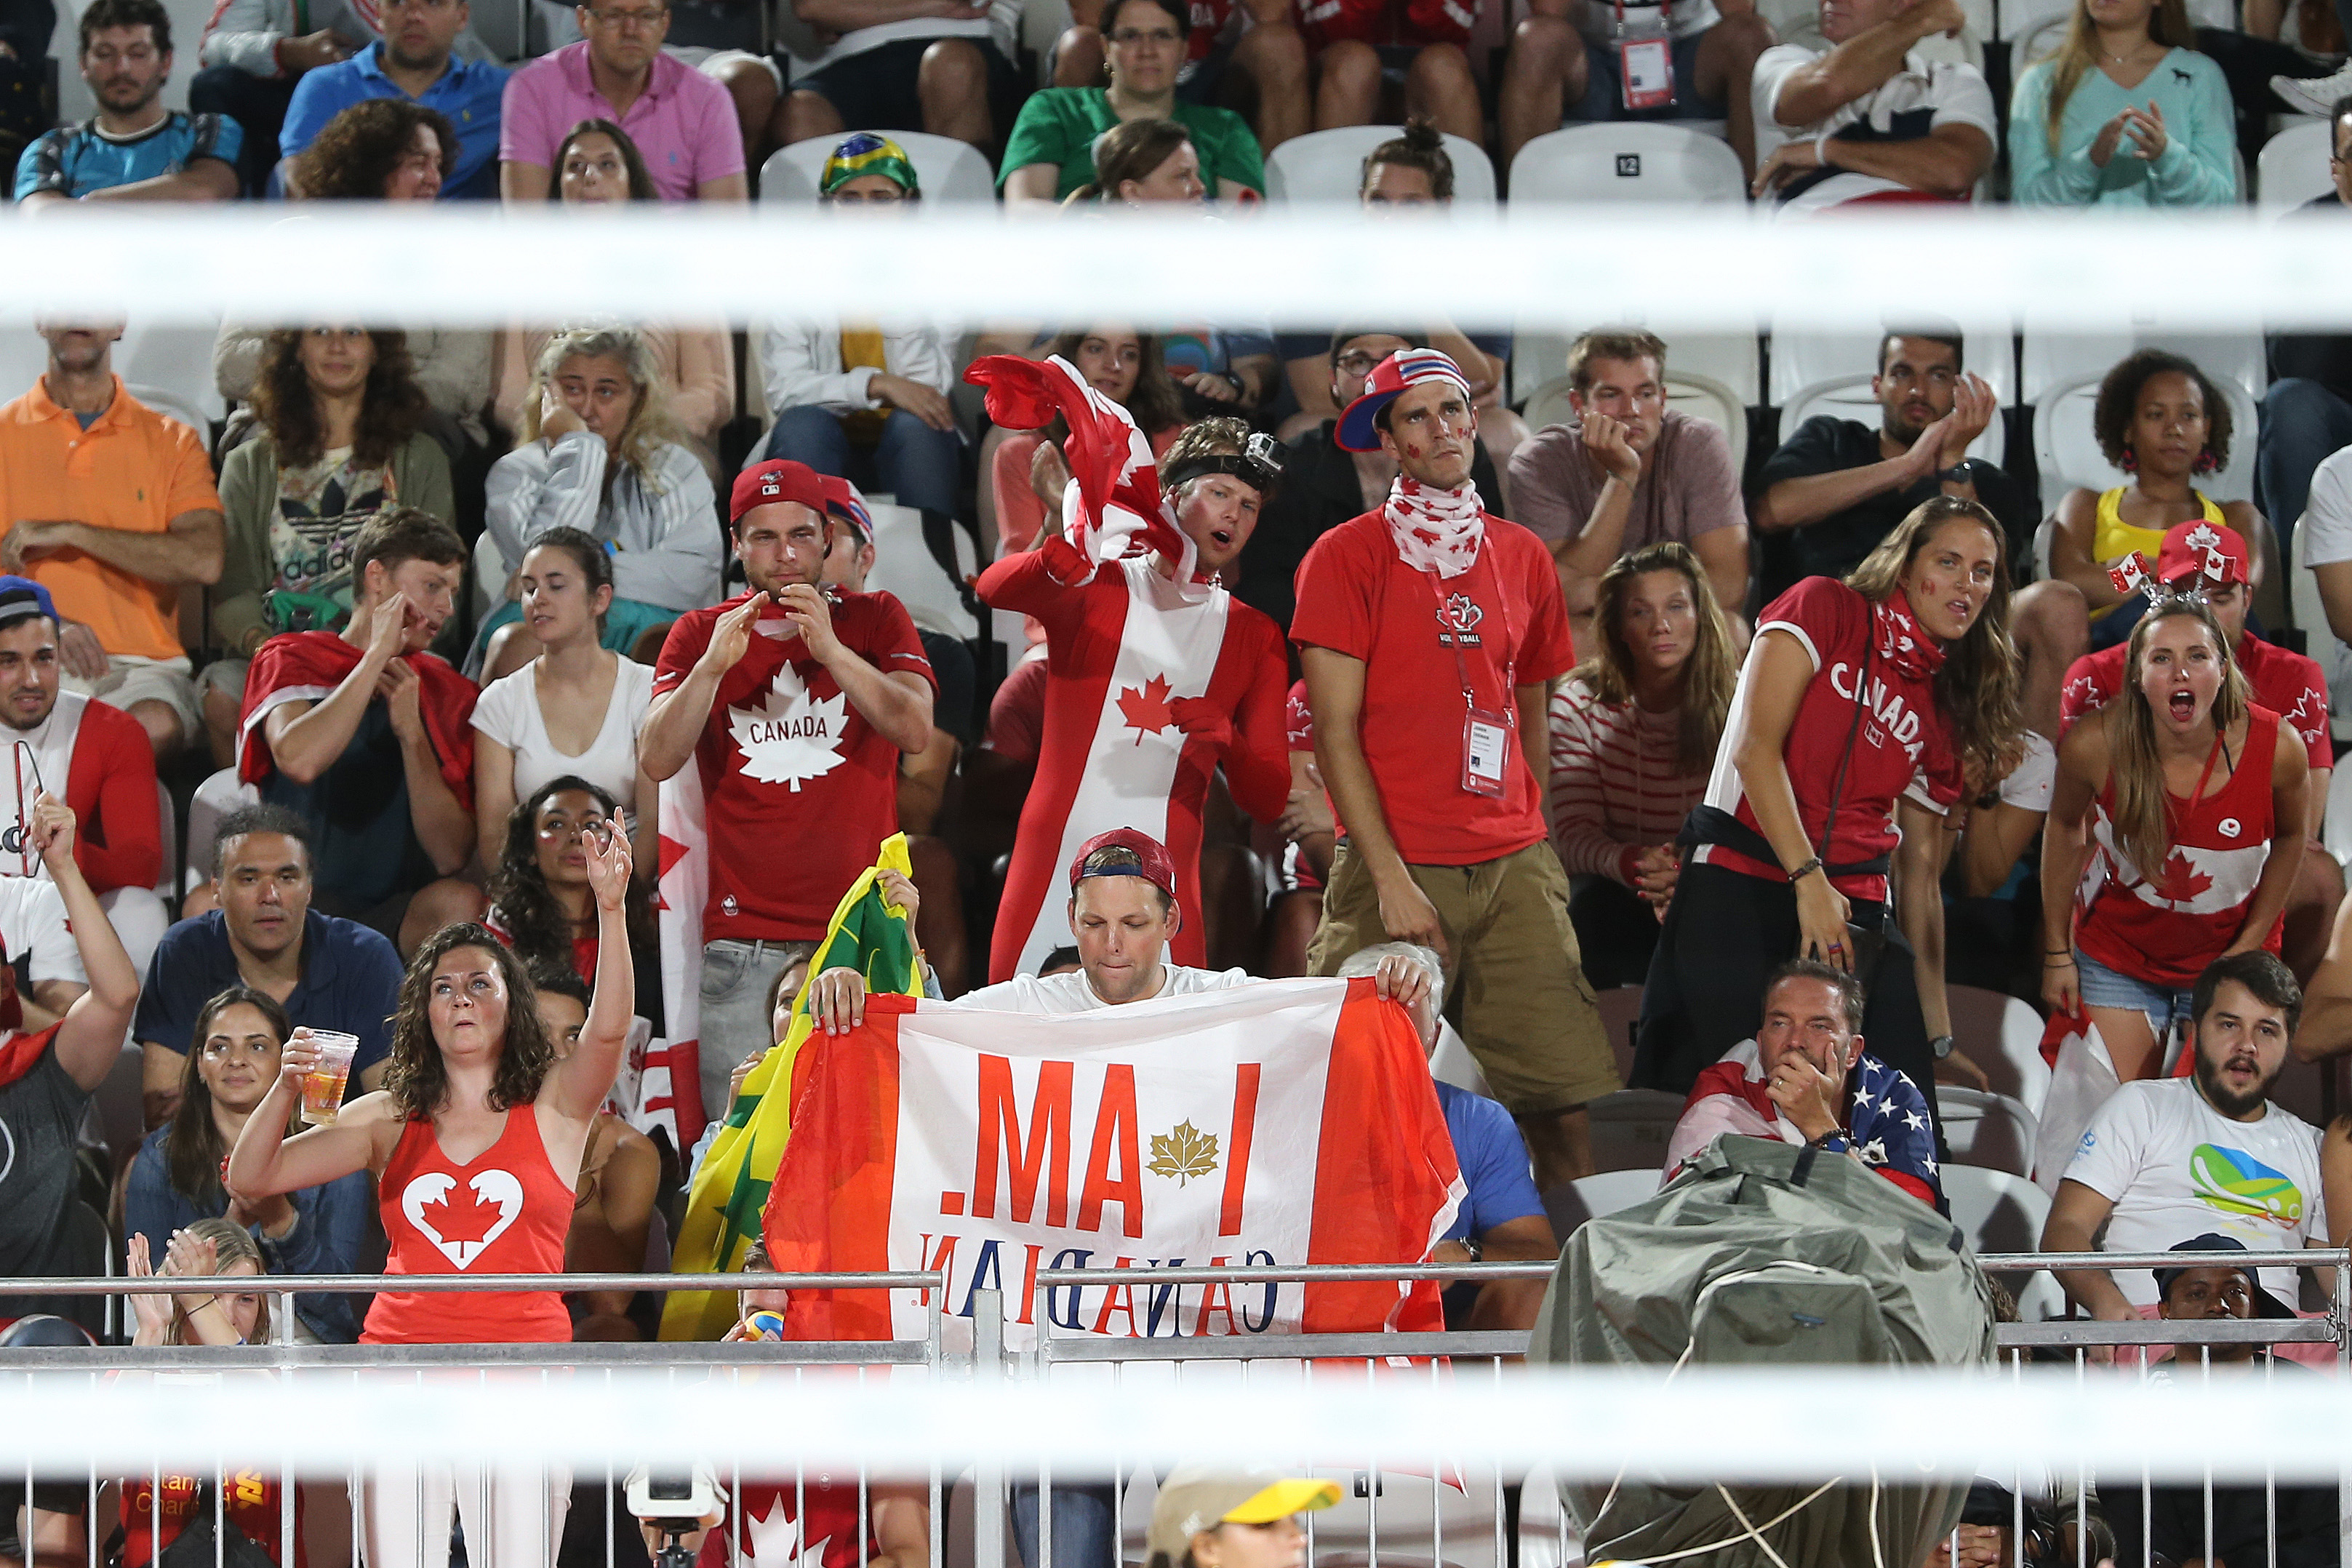 Supporters of Team Canada at the Rio 2016 beach volleyball tournament, August 6, 2016 / Photo via FIVB